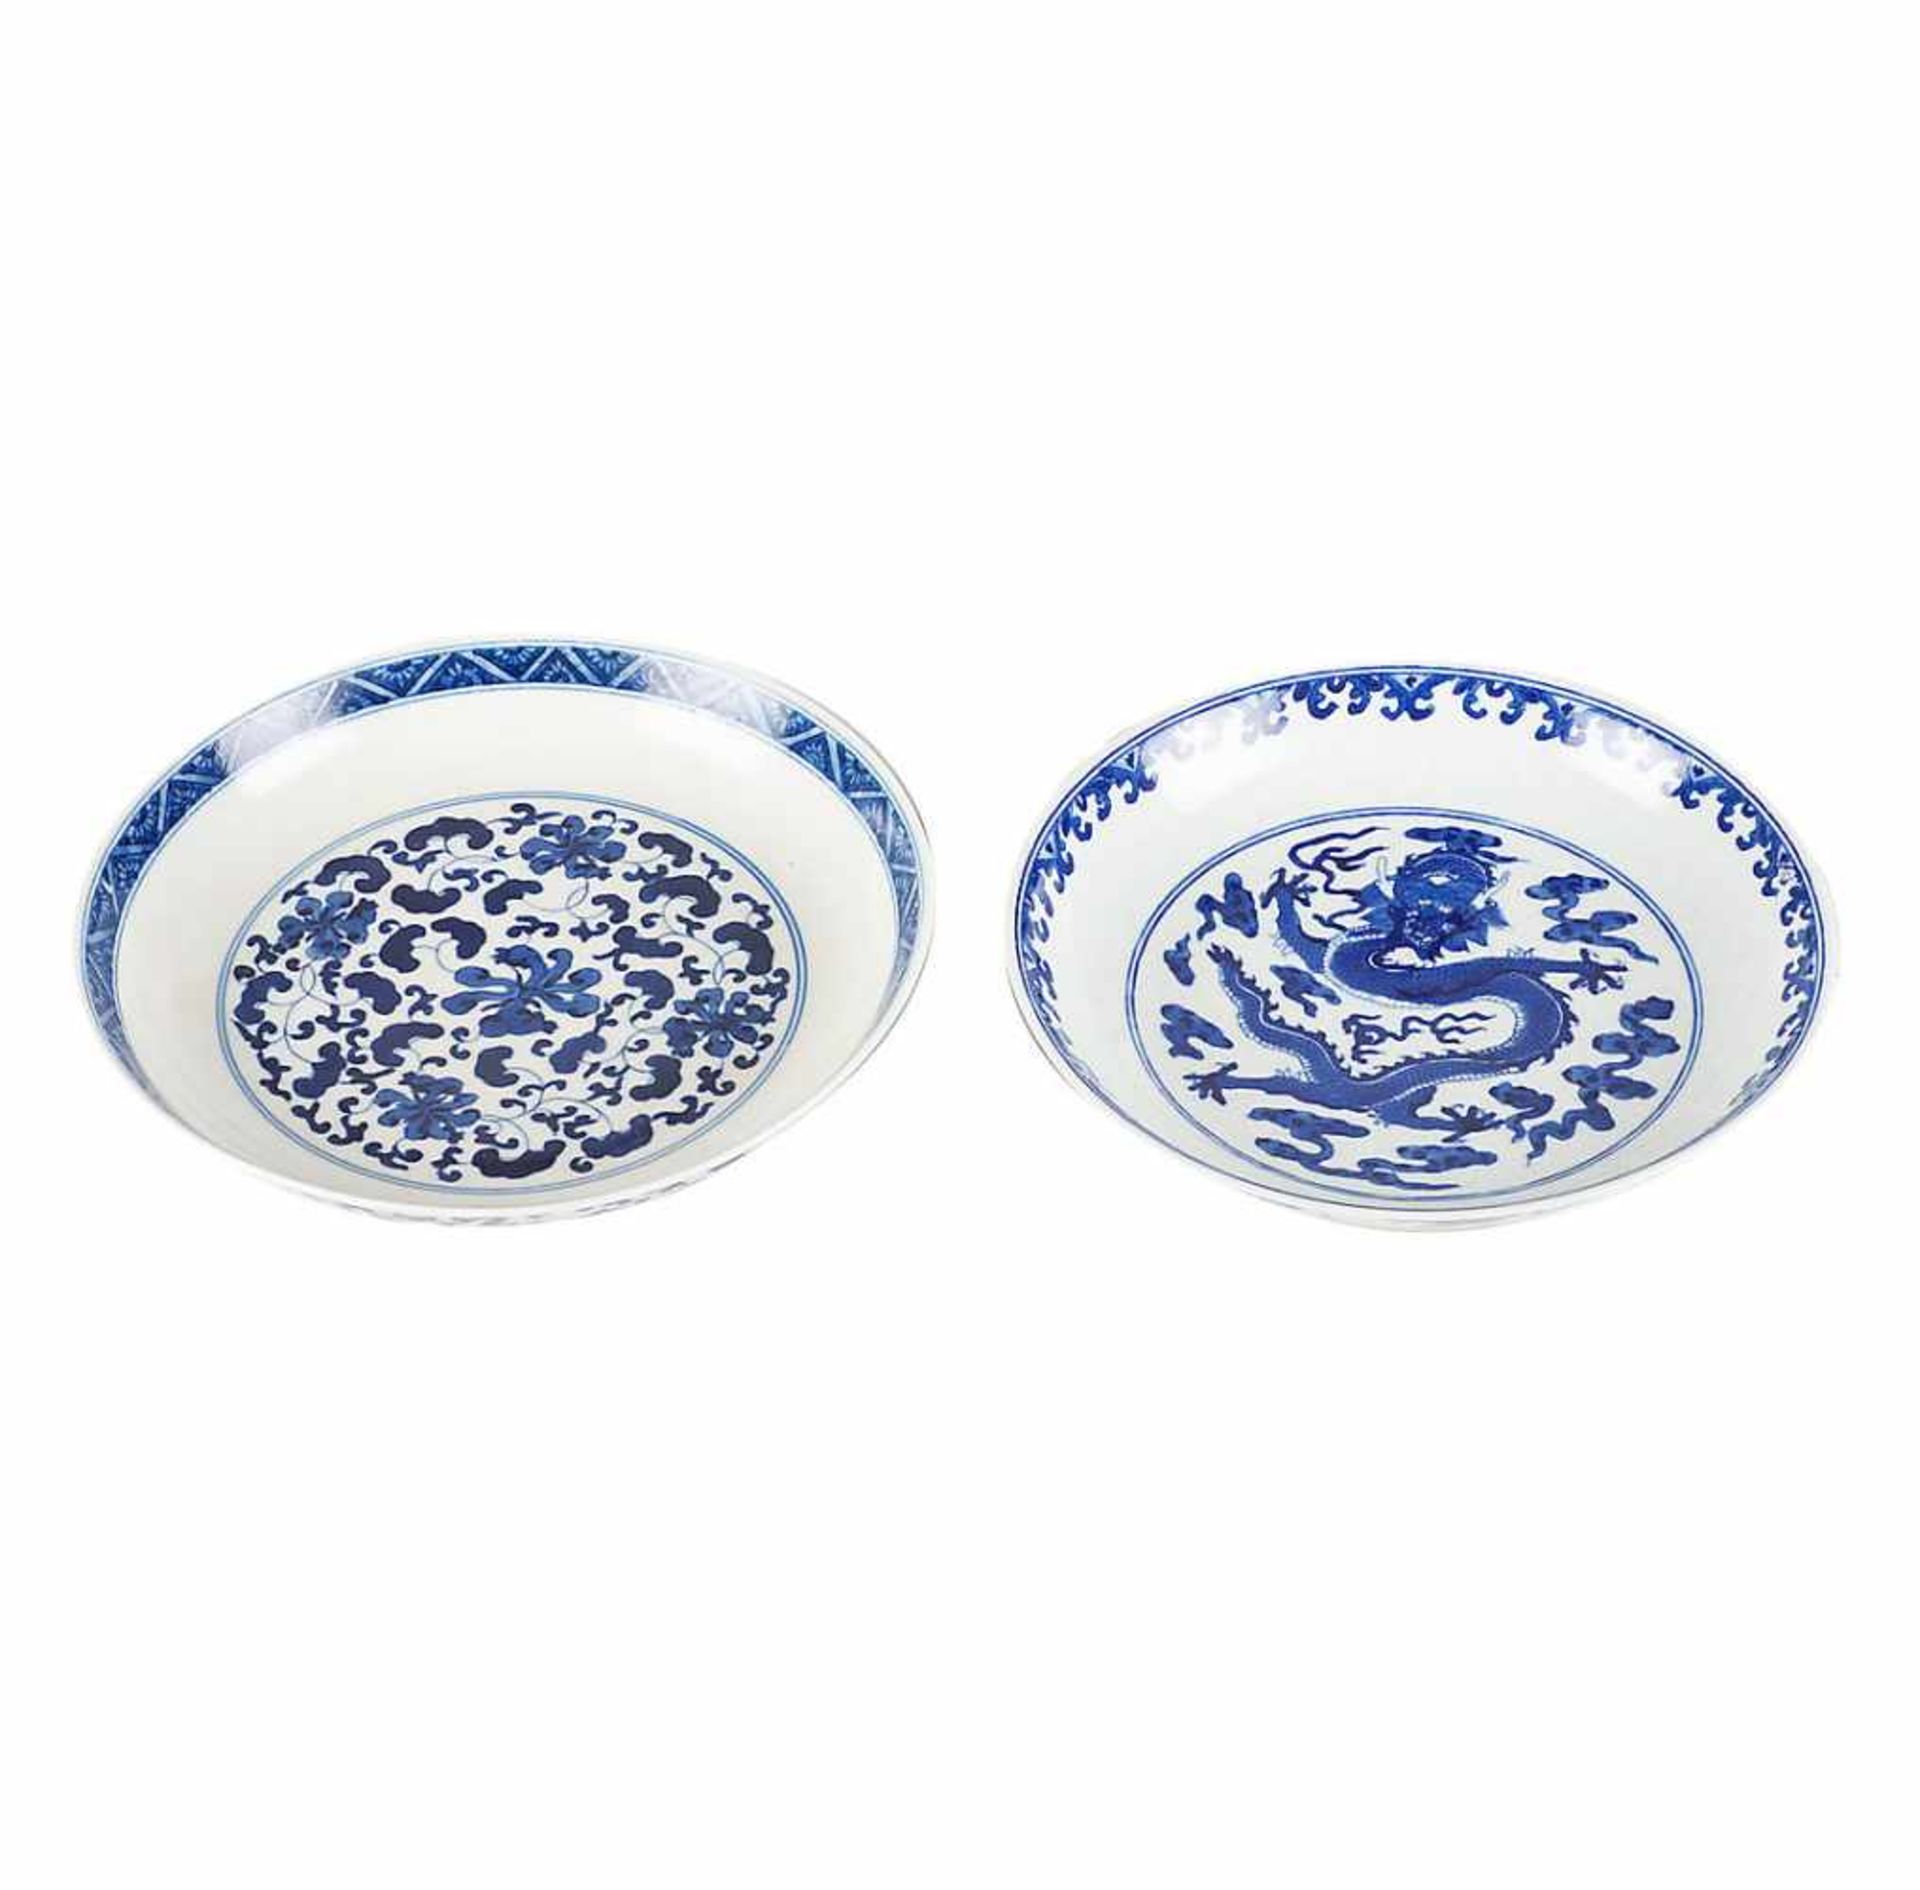 Two Chinese porcelain dishes, probably of the 18th Century.Brand Yongzen. 20.5 cm diam the largest